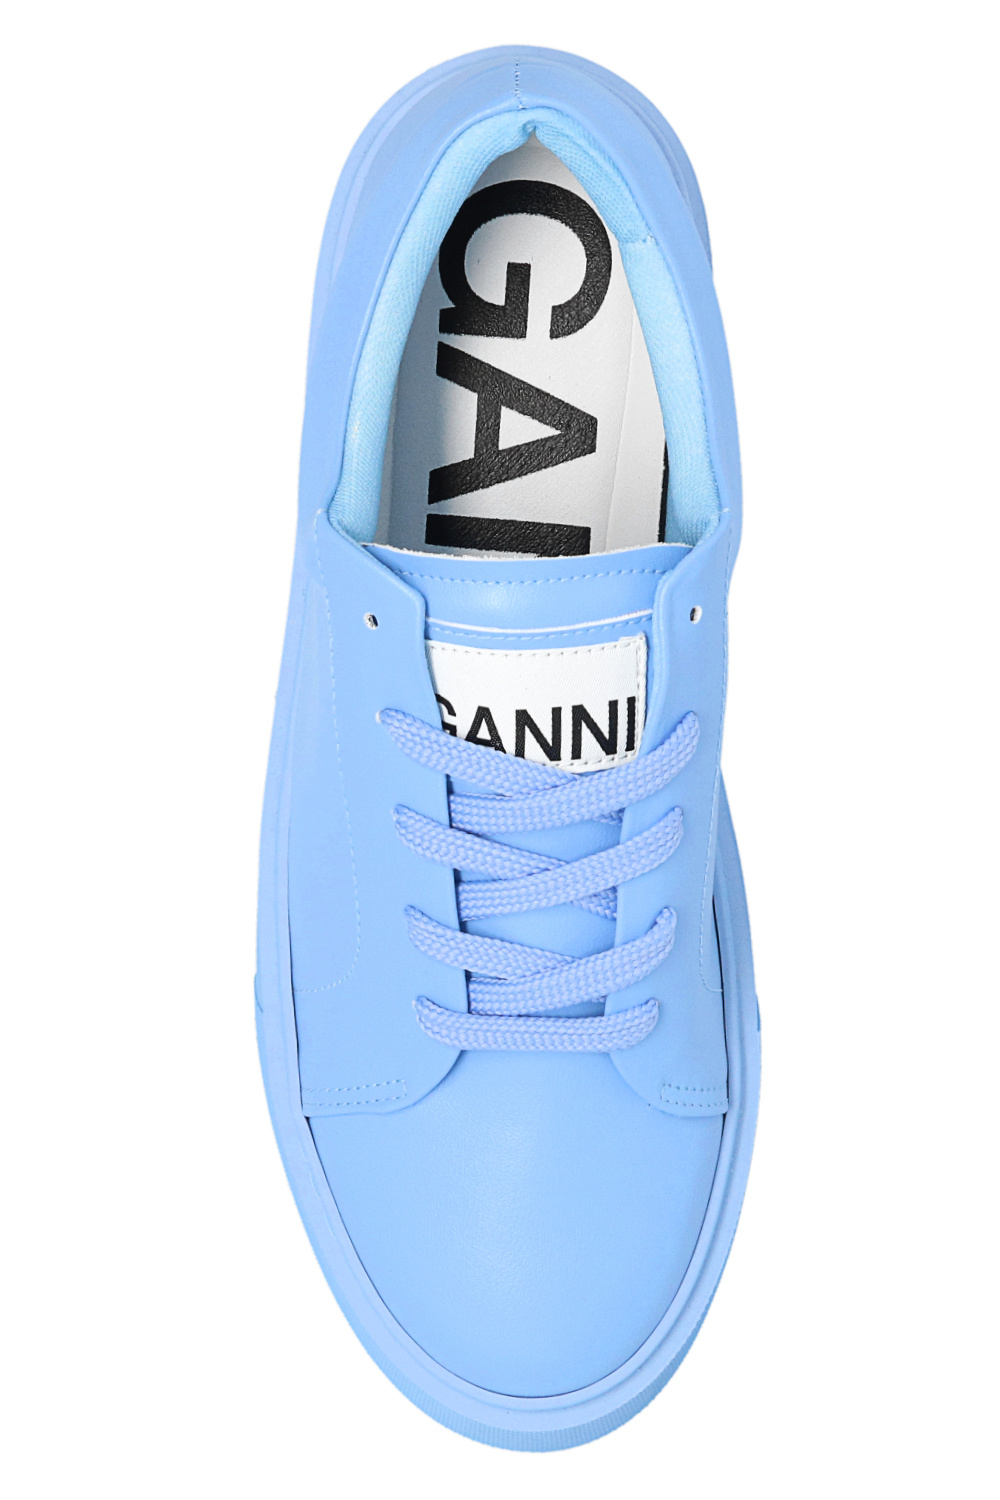 Forskelle Flipper melodrama Ganni Sneakers with logo | Women's Shoes | Vitkac